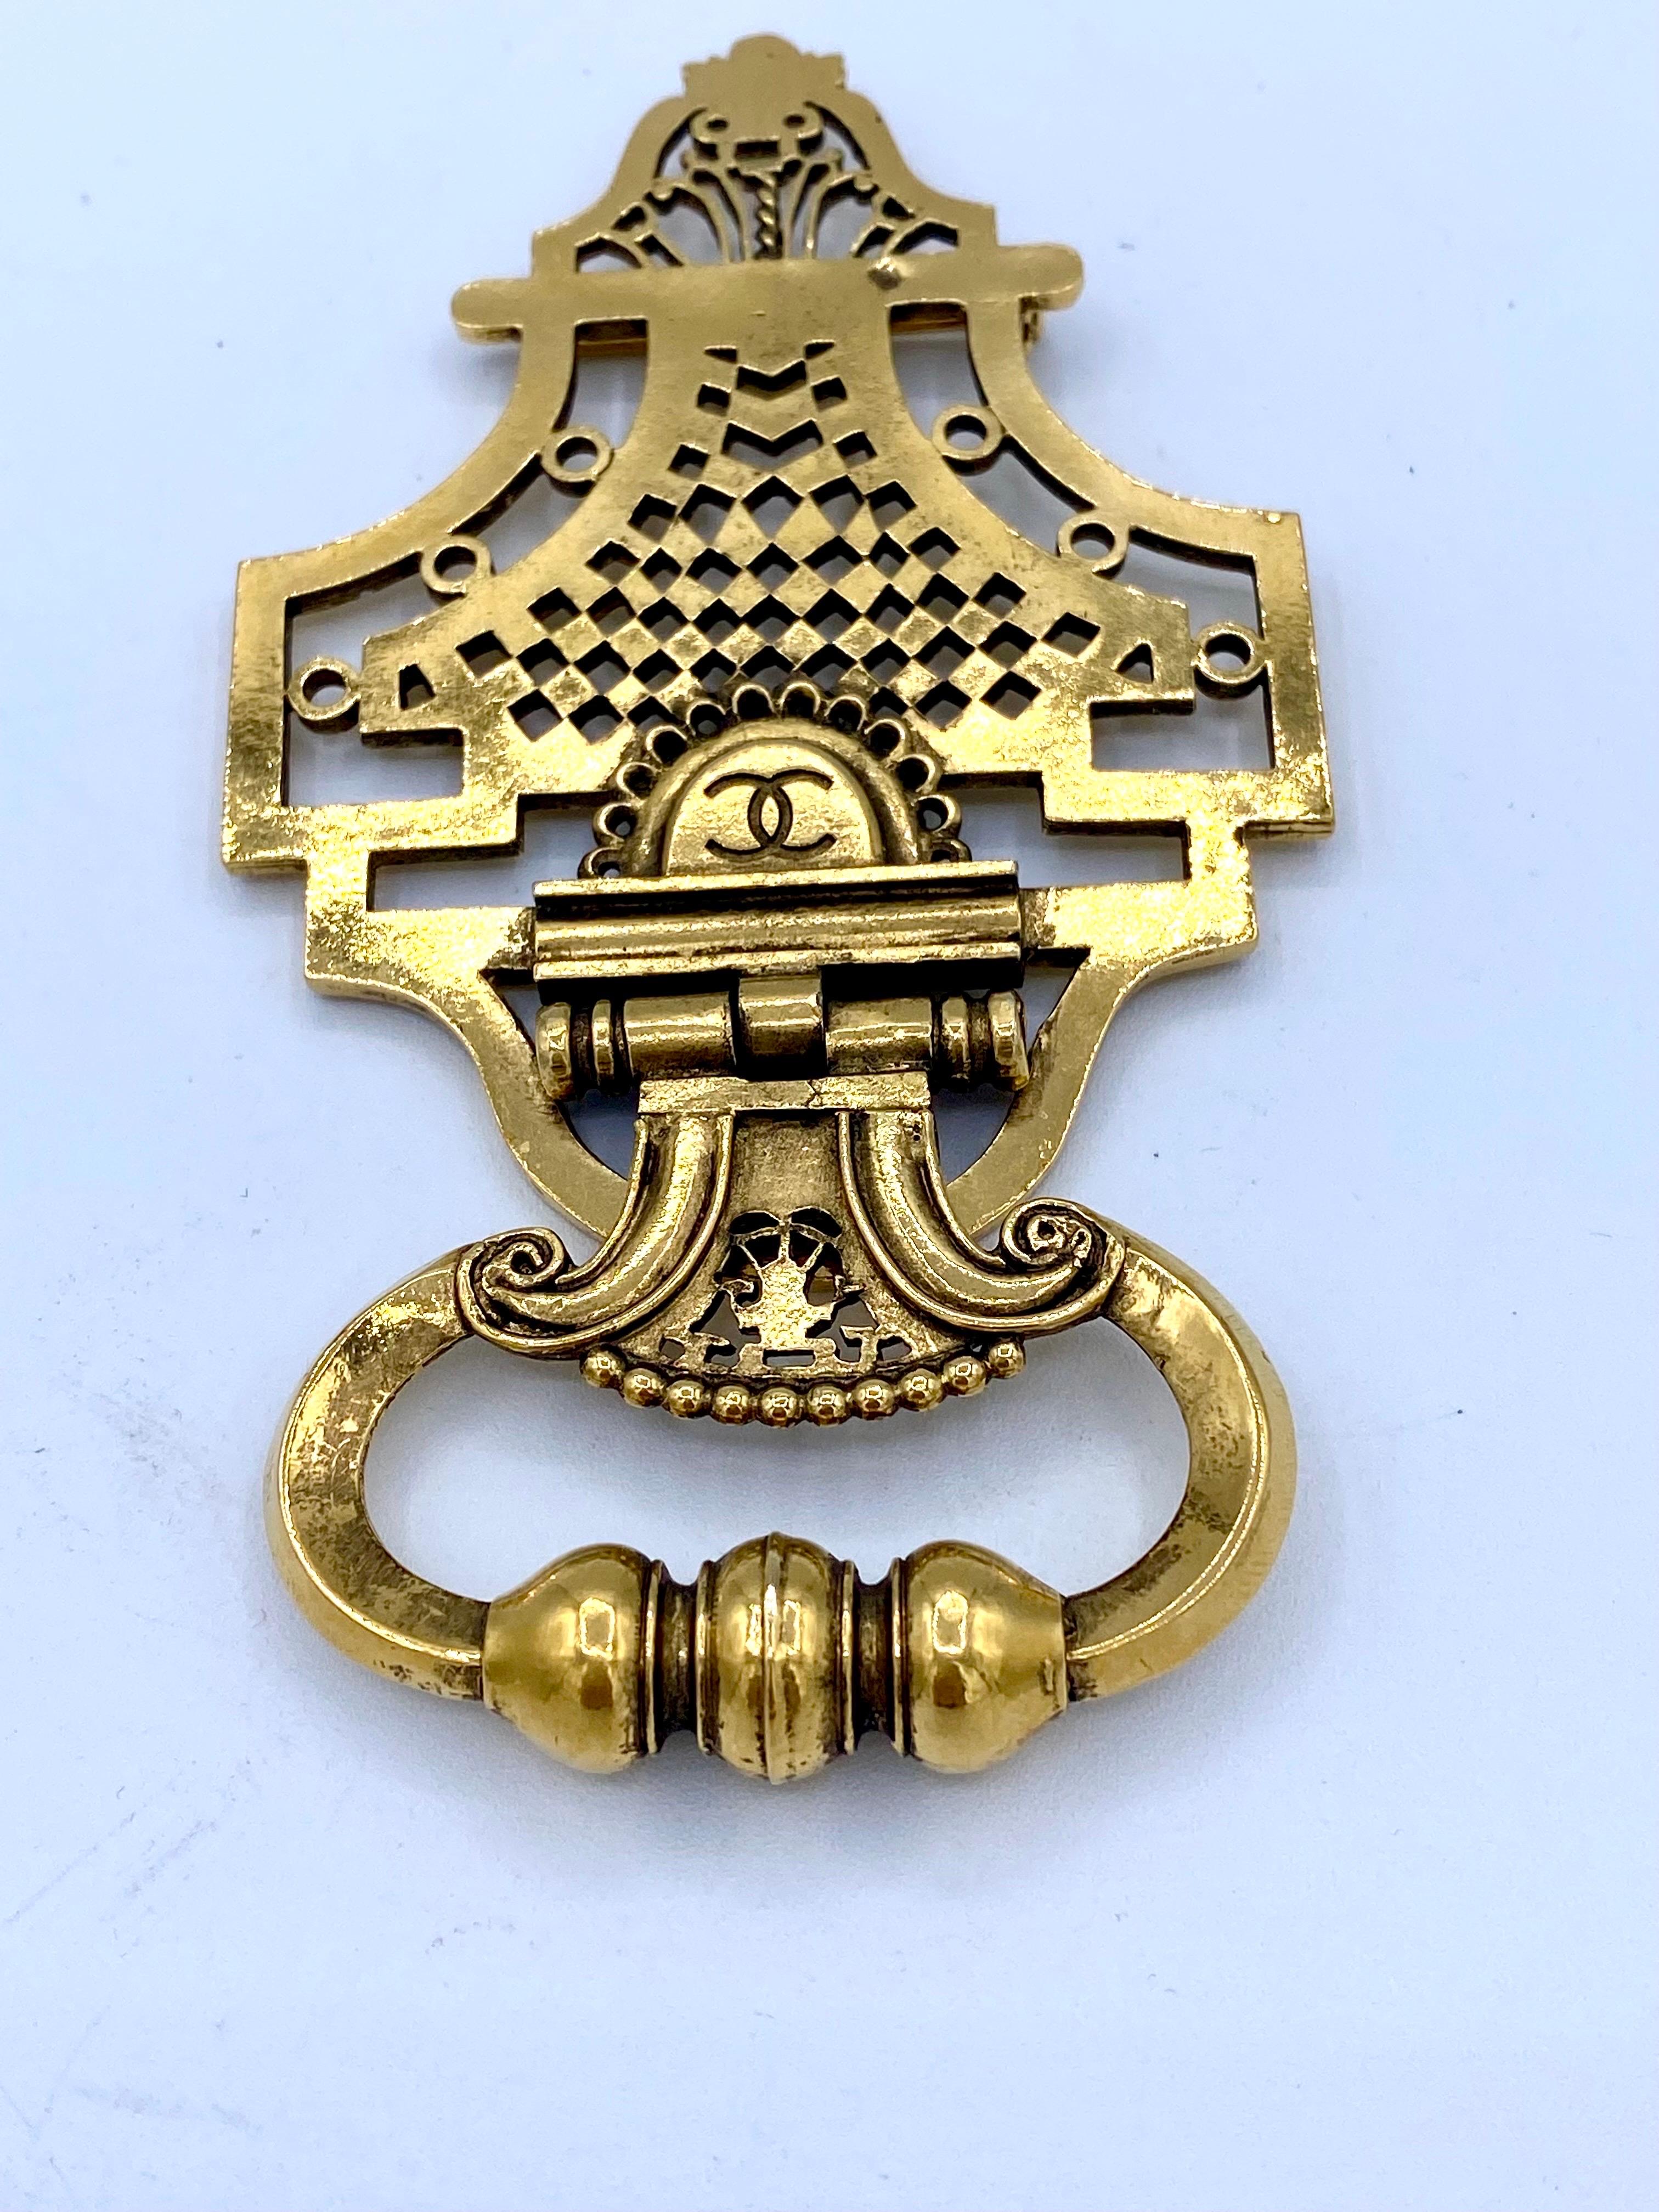 Imposing vintage Chanel brooch, door knocker in gold metal from the 1990s.
Height is 13.6cm
the width of 7.4cm
the thickness (at the widest) 1.2cm
The pin received a blow on the top (see photo)
Comes with a Chanel box.